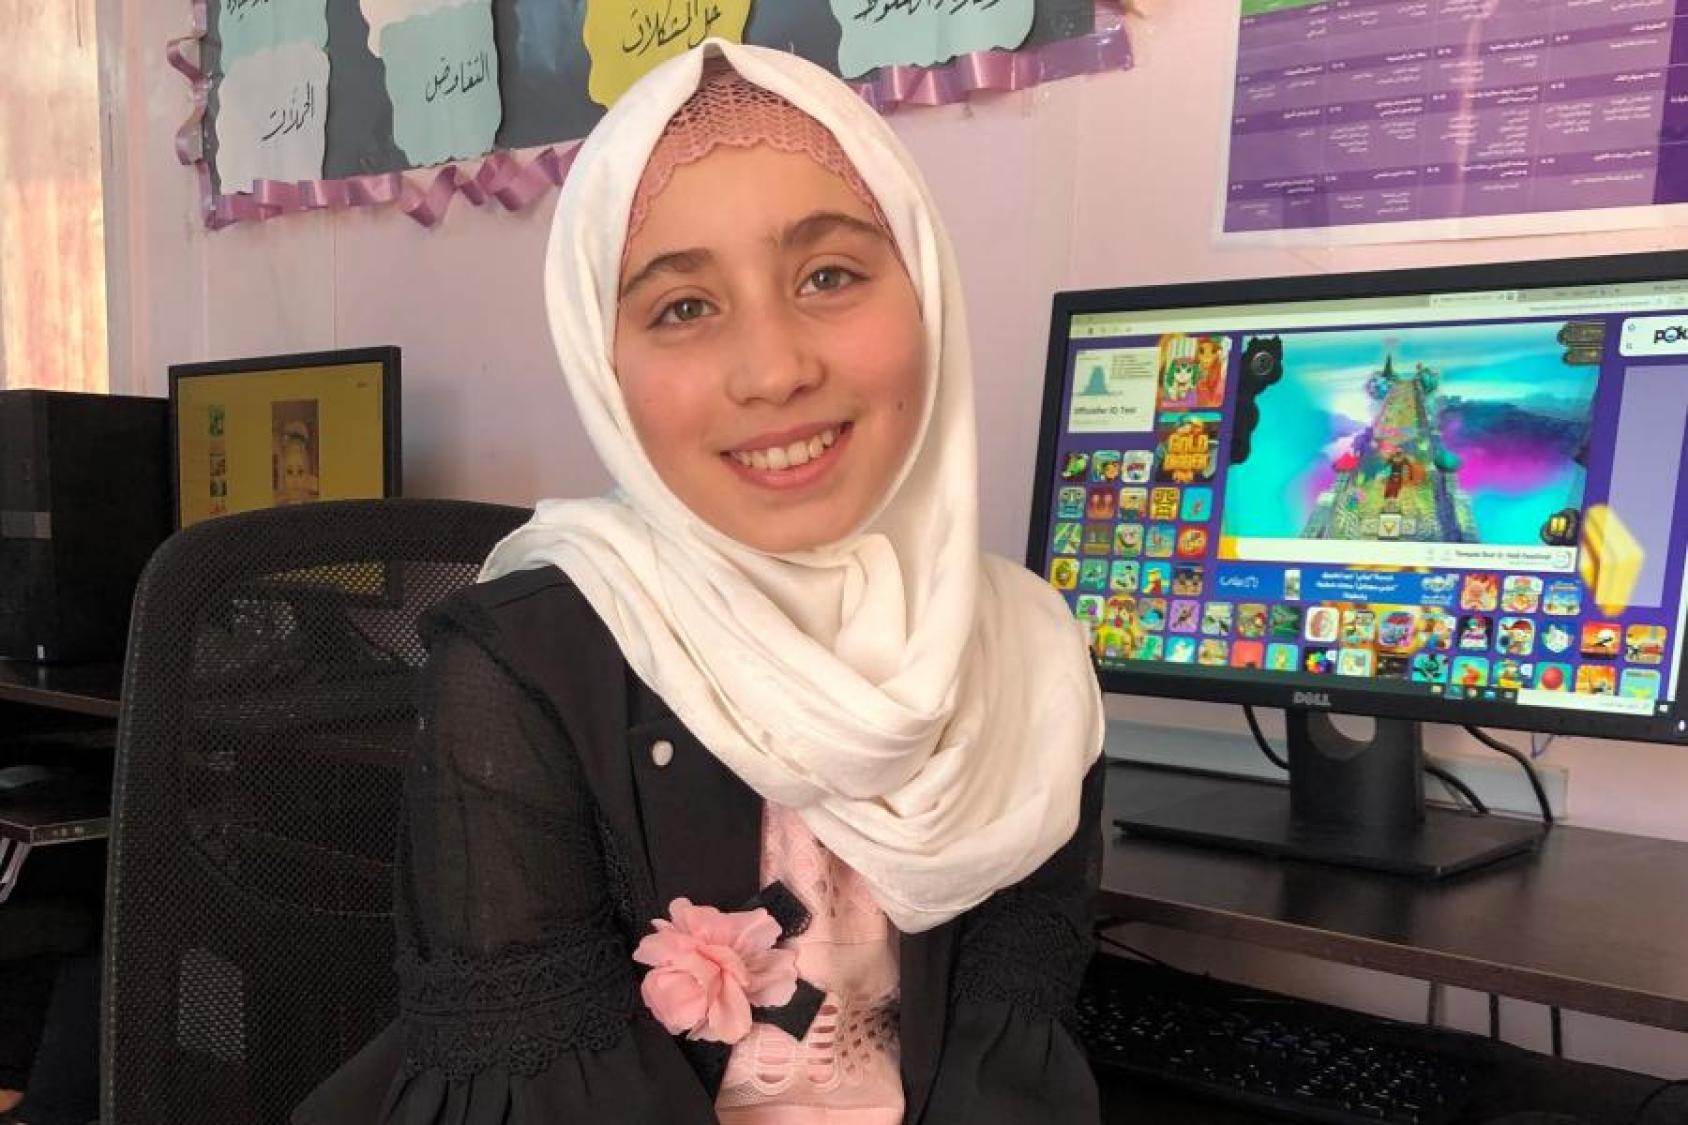 A smiling girl, with a white hijab, smiles at the camera near a computer displaying a game. 